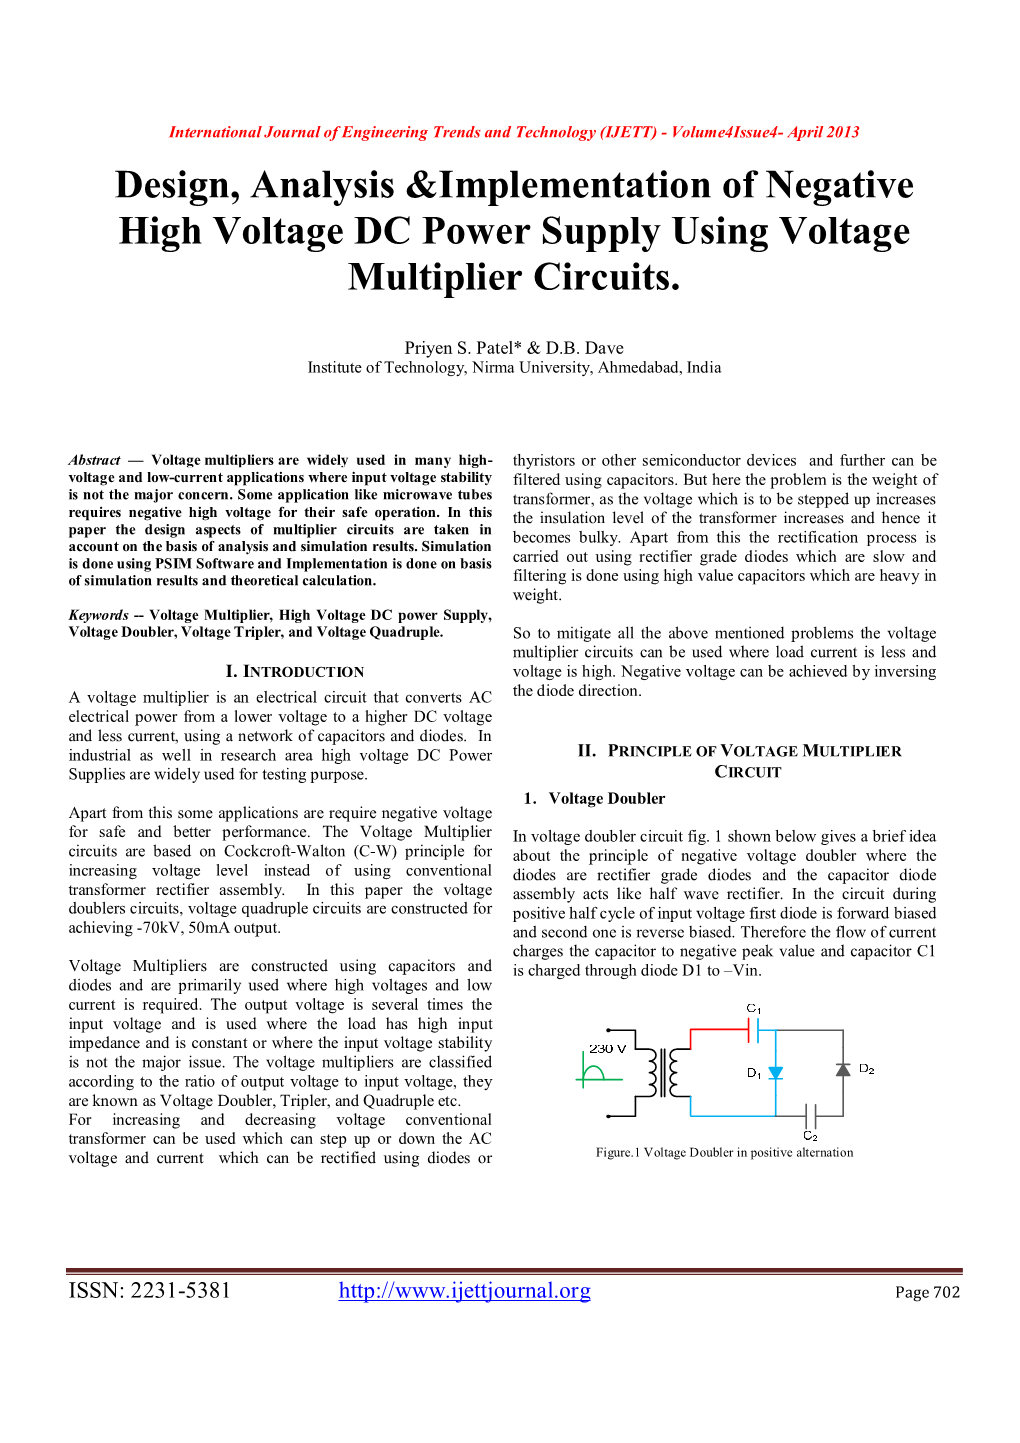 Design, Analysis &Implementation of Negative High Voltage DC Power Supply Using Voltage Multiplier Circuits